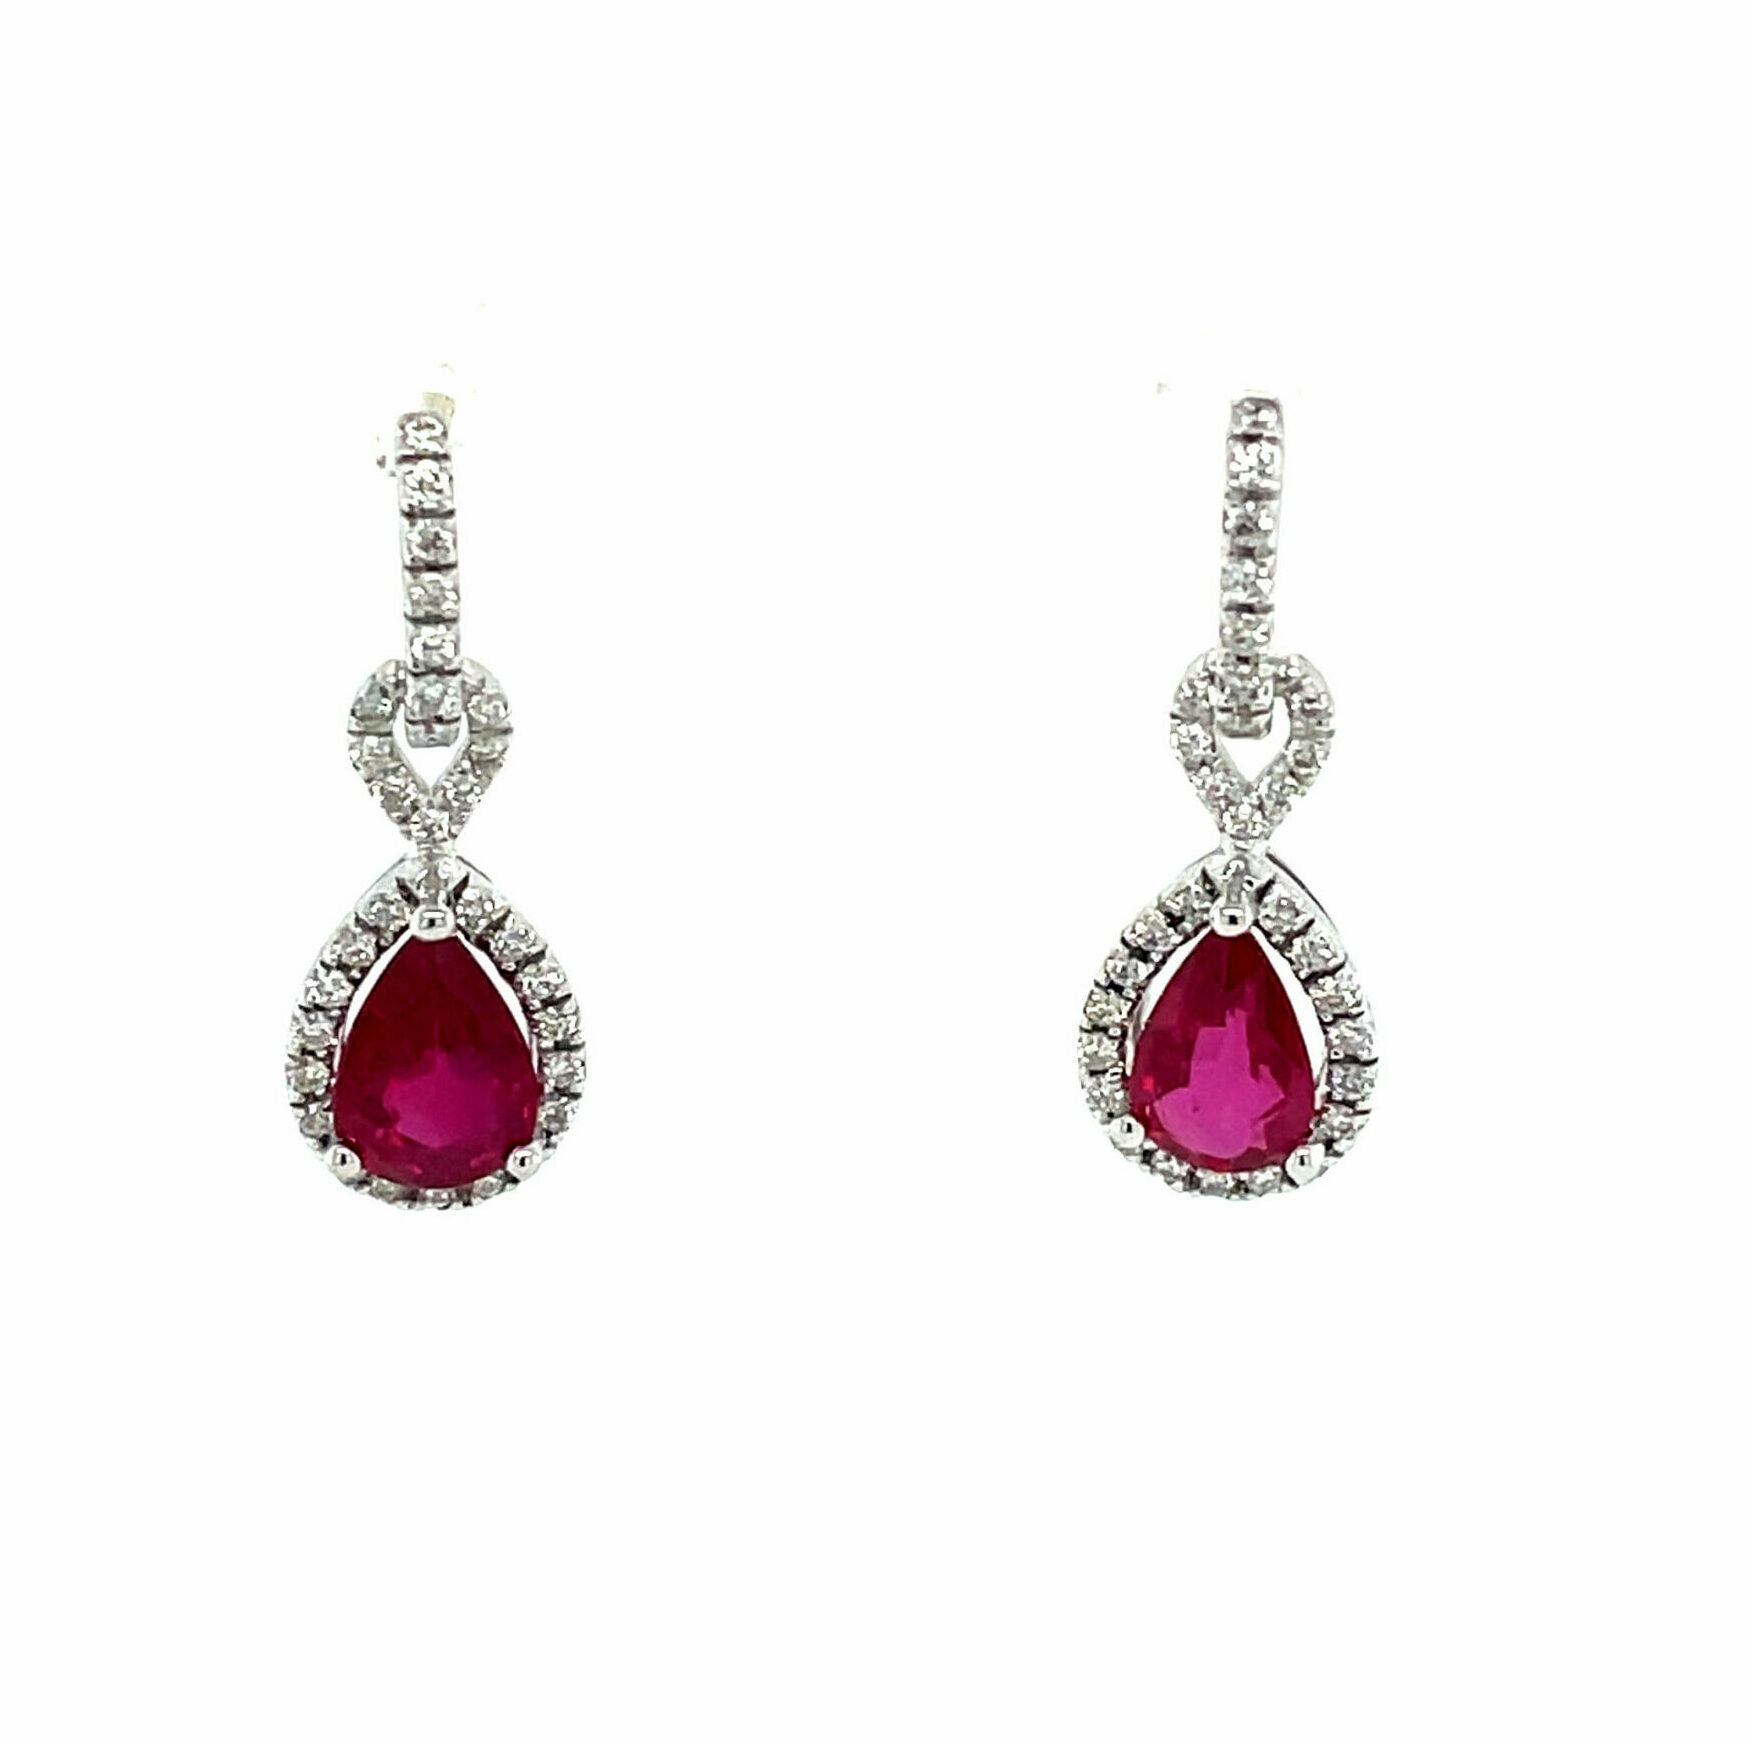 White Gold Diamond and Ruby Drop Earrings